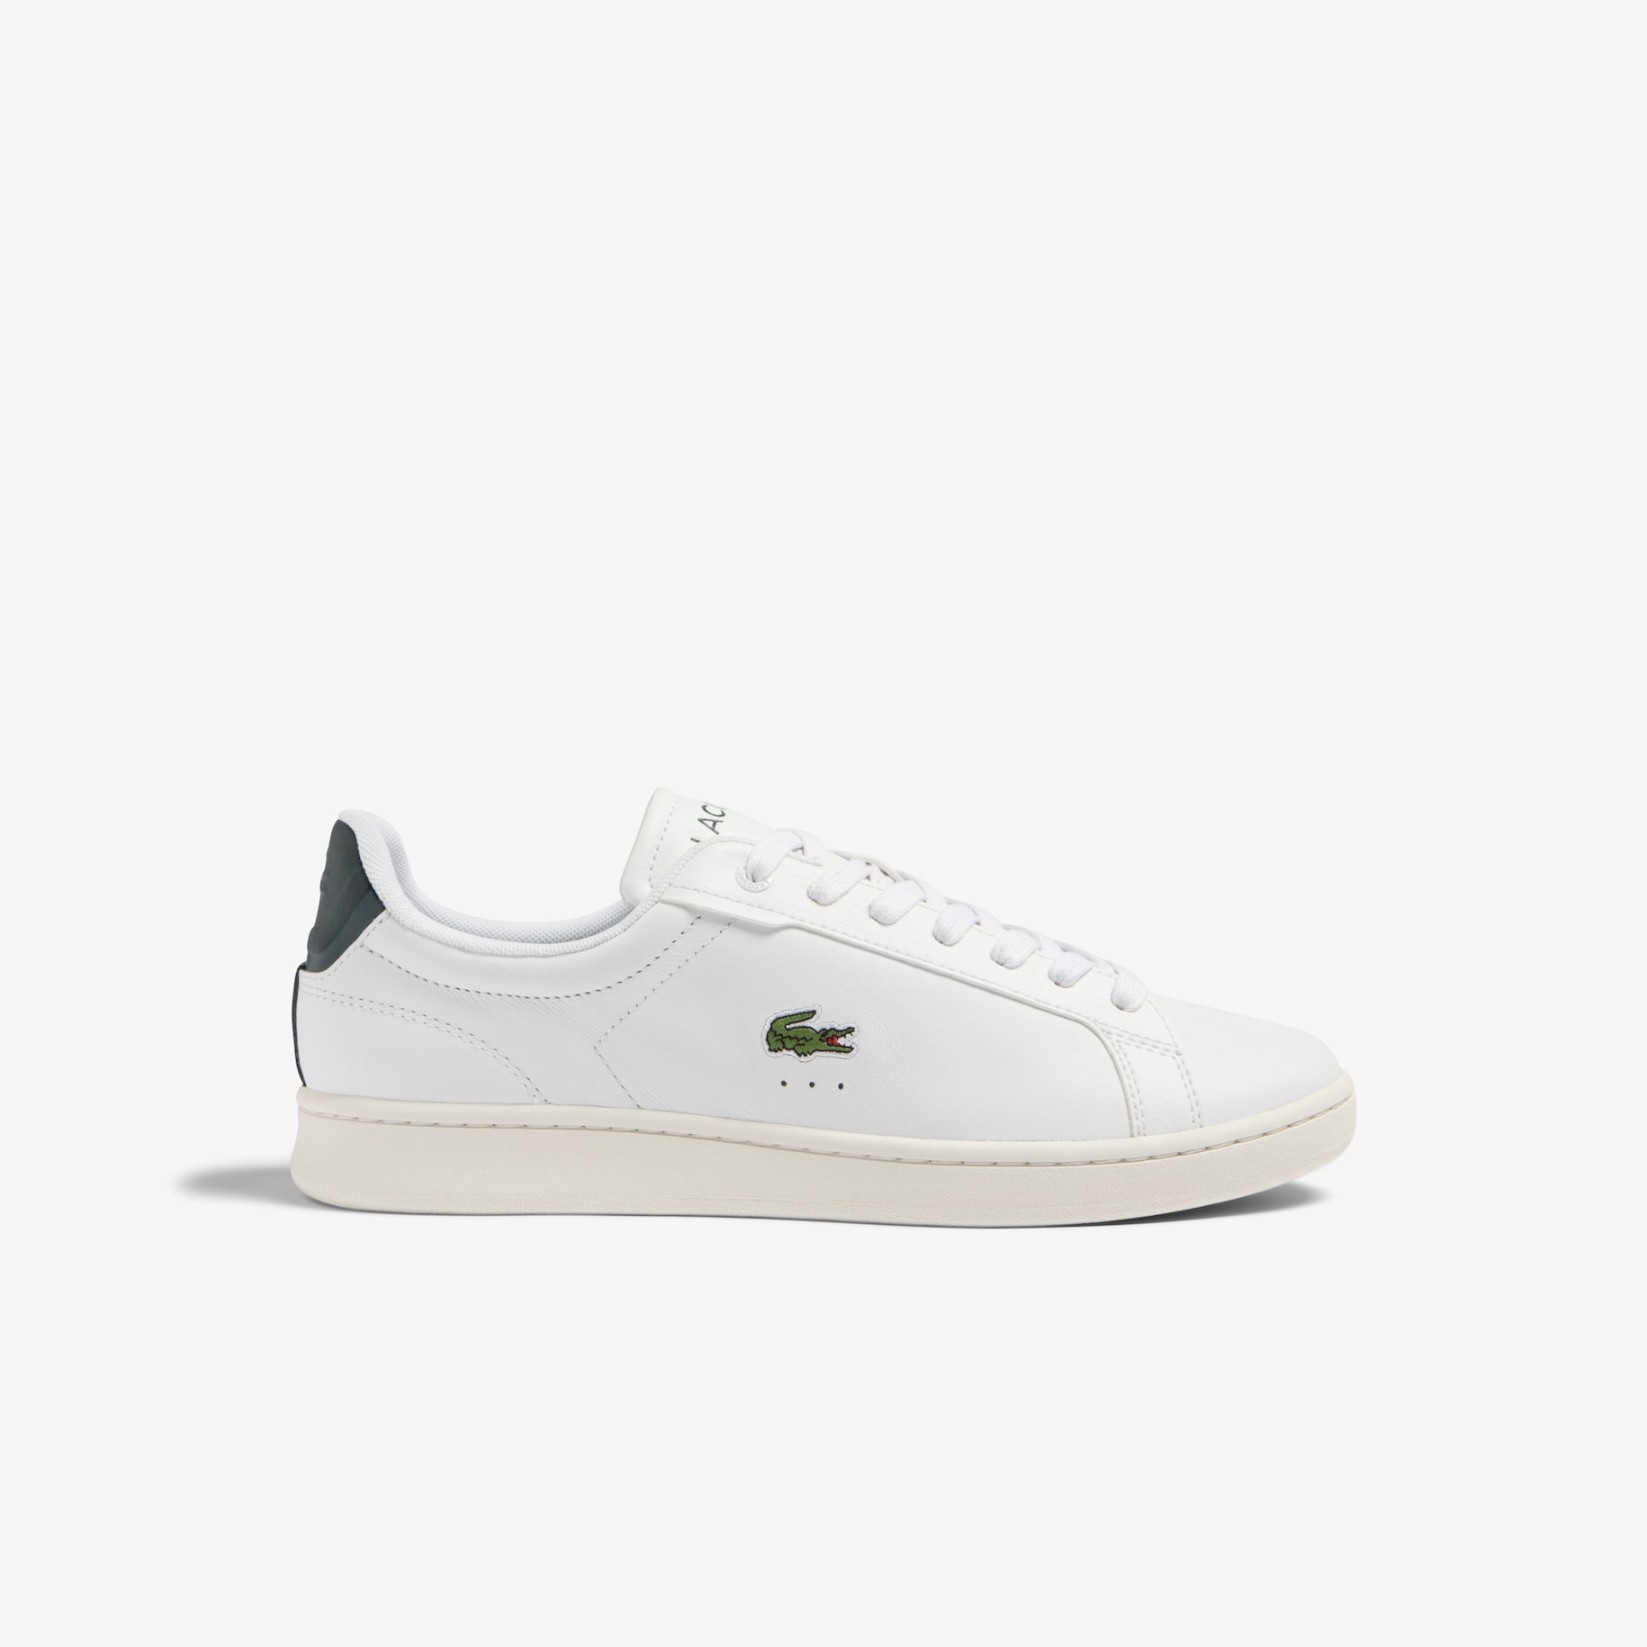 DEPORTIVO MENS LACOSTE CARNABY PRO LEATHER PREMIUM SNEAKERS WHITE / DARK GREEN